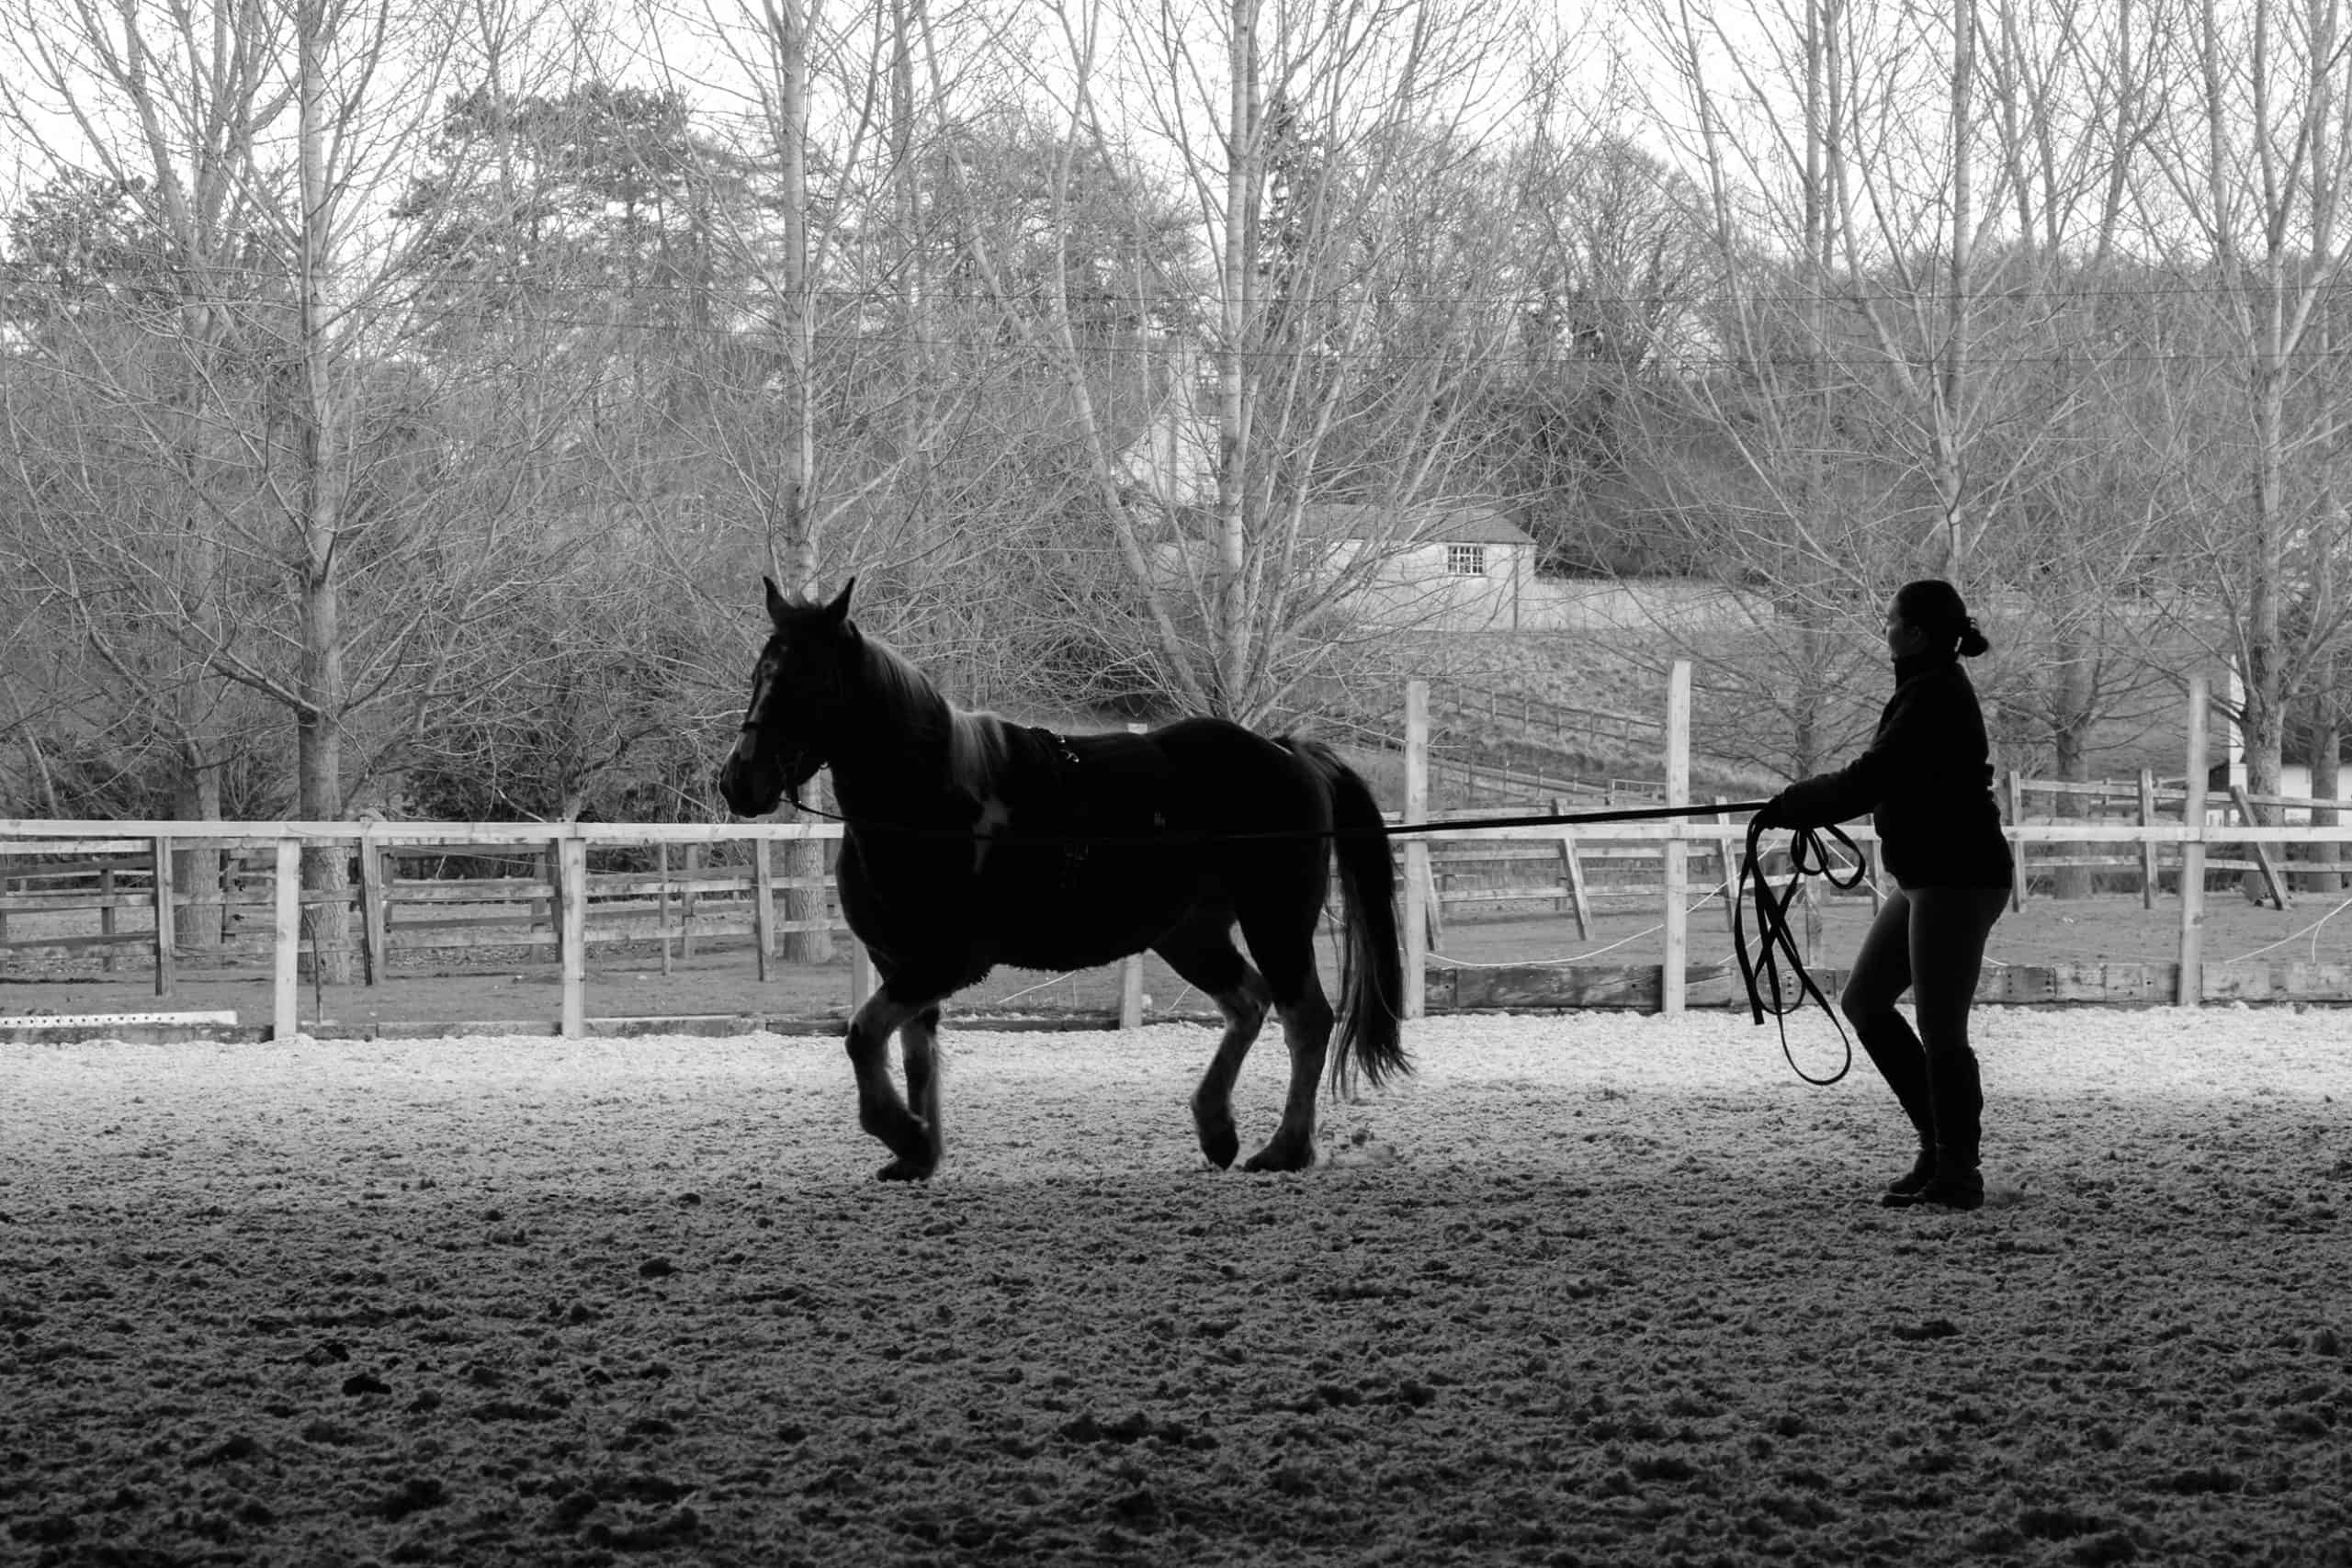 woman and pony in silhouette. Horse being exercised on long reigns on soft arena surface within a countryside backdrop